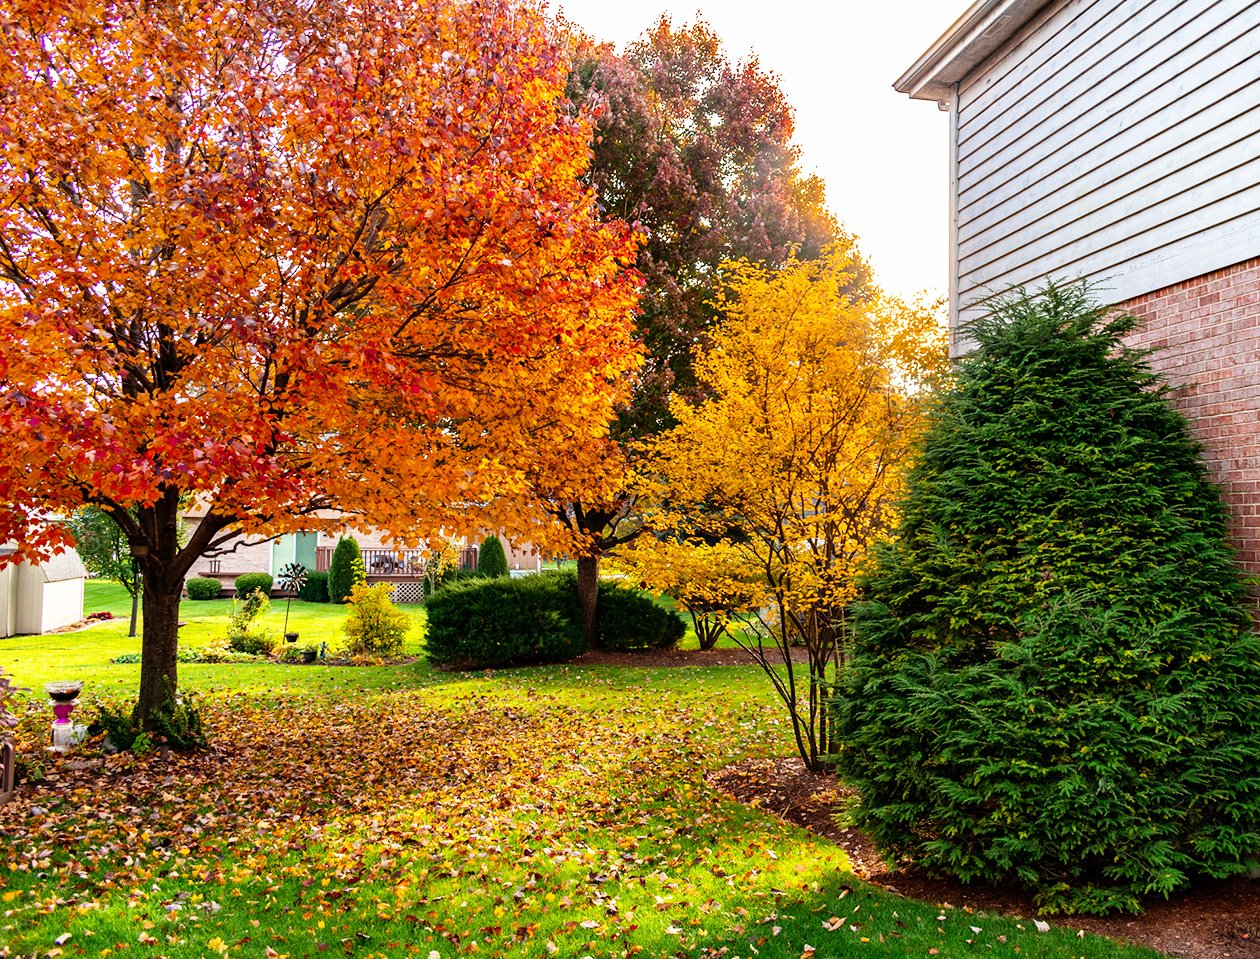 Colourful deciduous and evergreen trees in a residential backyard